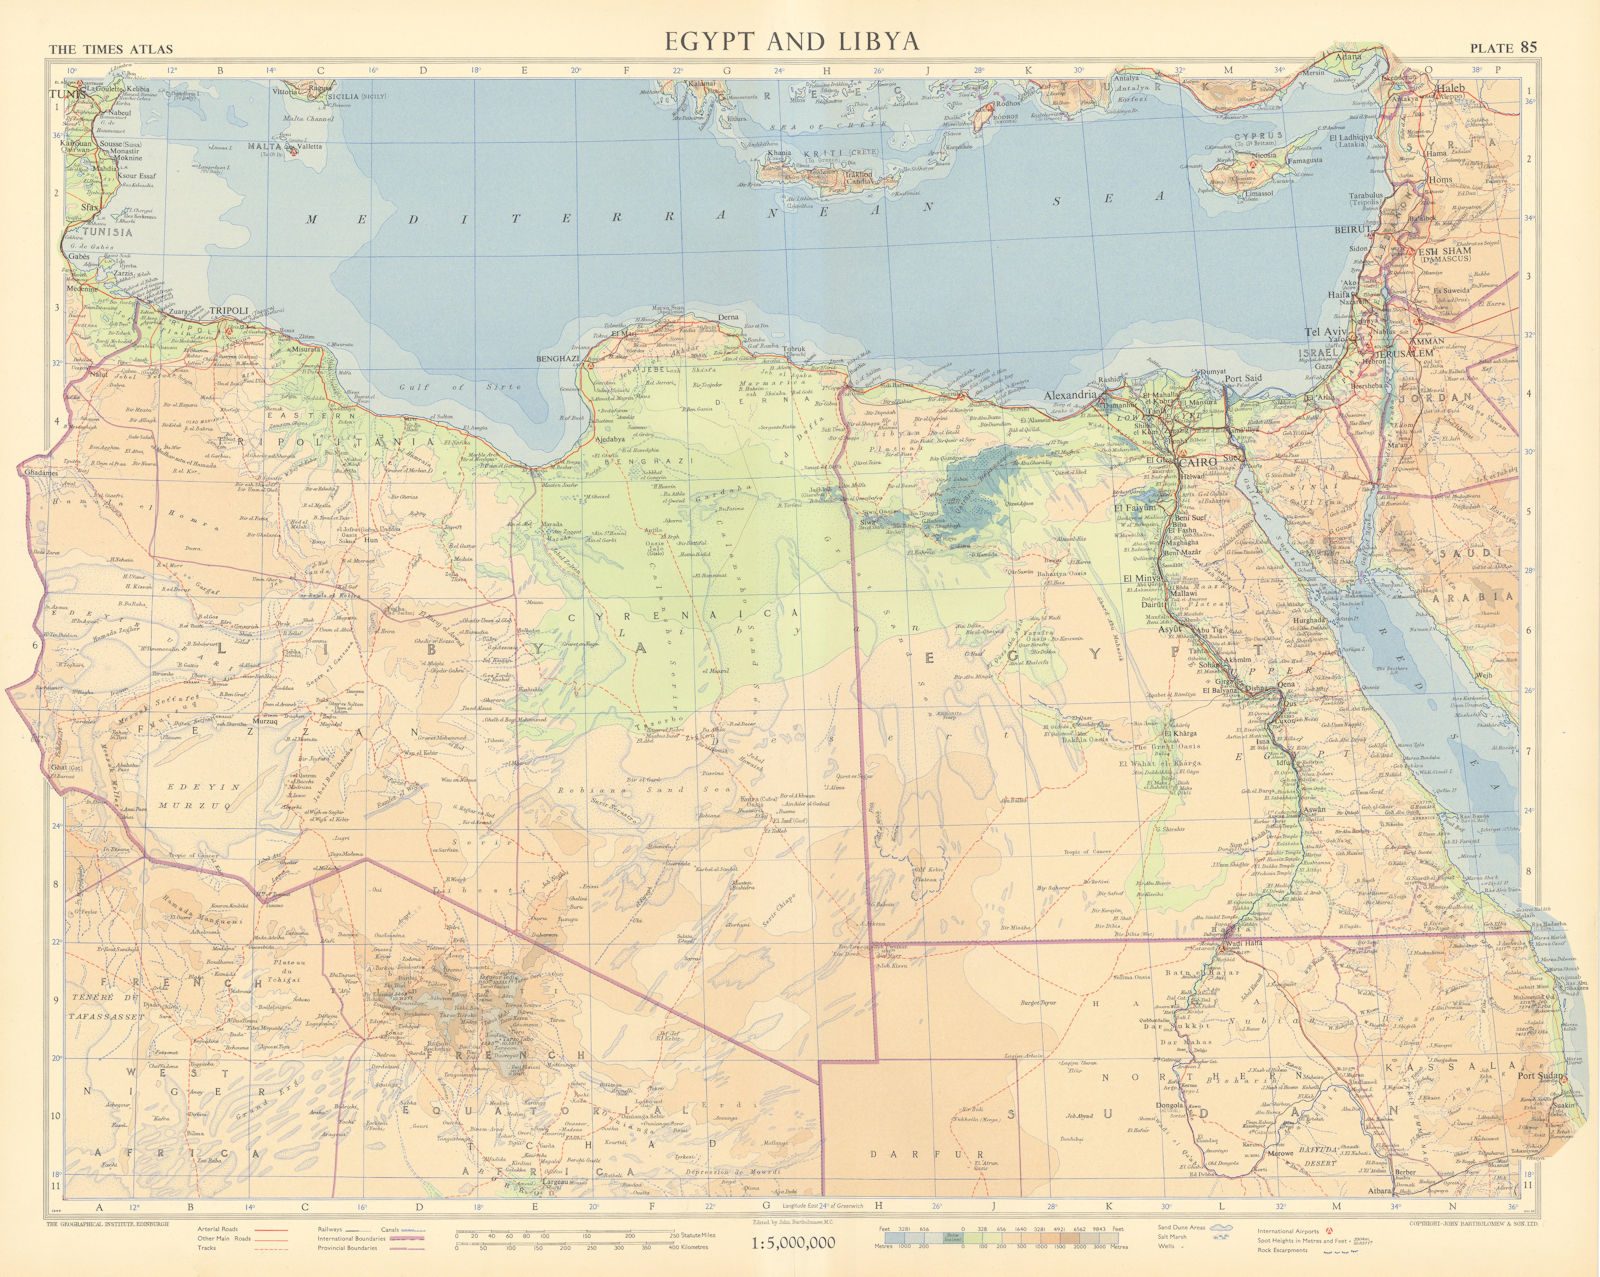 Egypt and Libya. Sand dune areas & desert tracks. North Africa. TIMES 1956 map